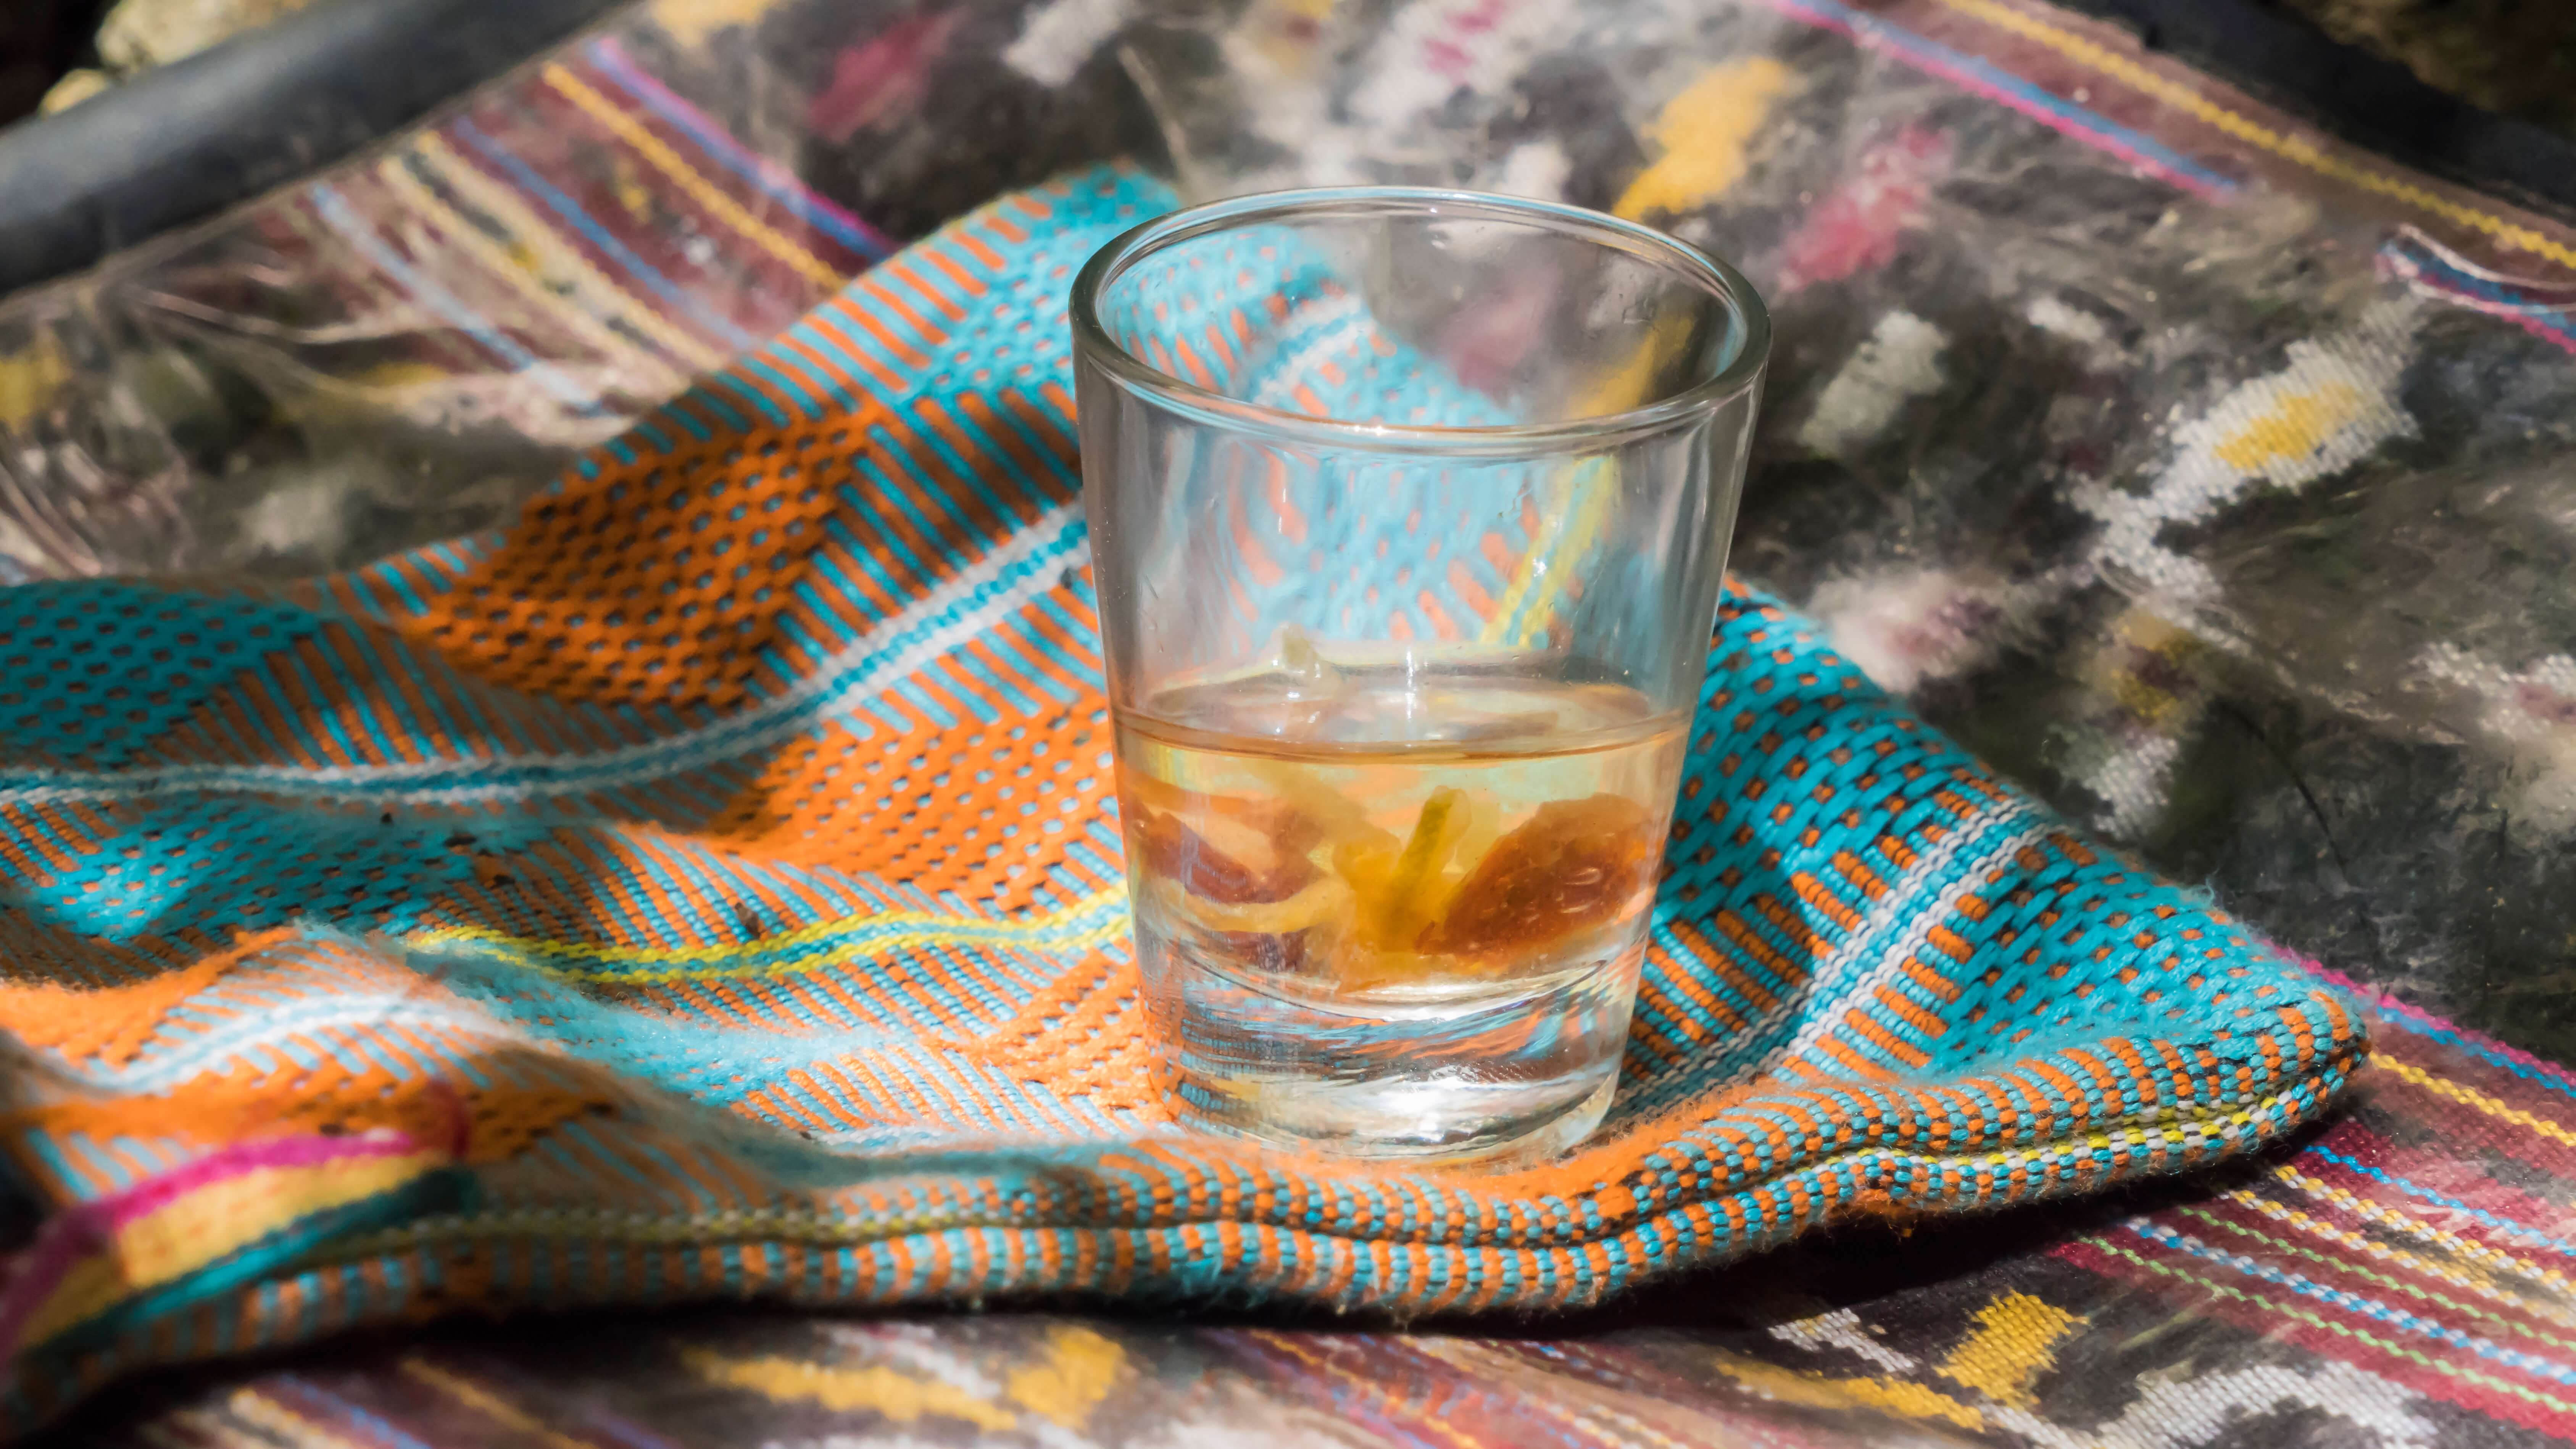 A glass of sopi lakoat, which is loquat-infused Timorese palm wine served with a garnish of dried fruit, served atop a piece of tenun lotis cloth. Photo by Andra Fembriarto